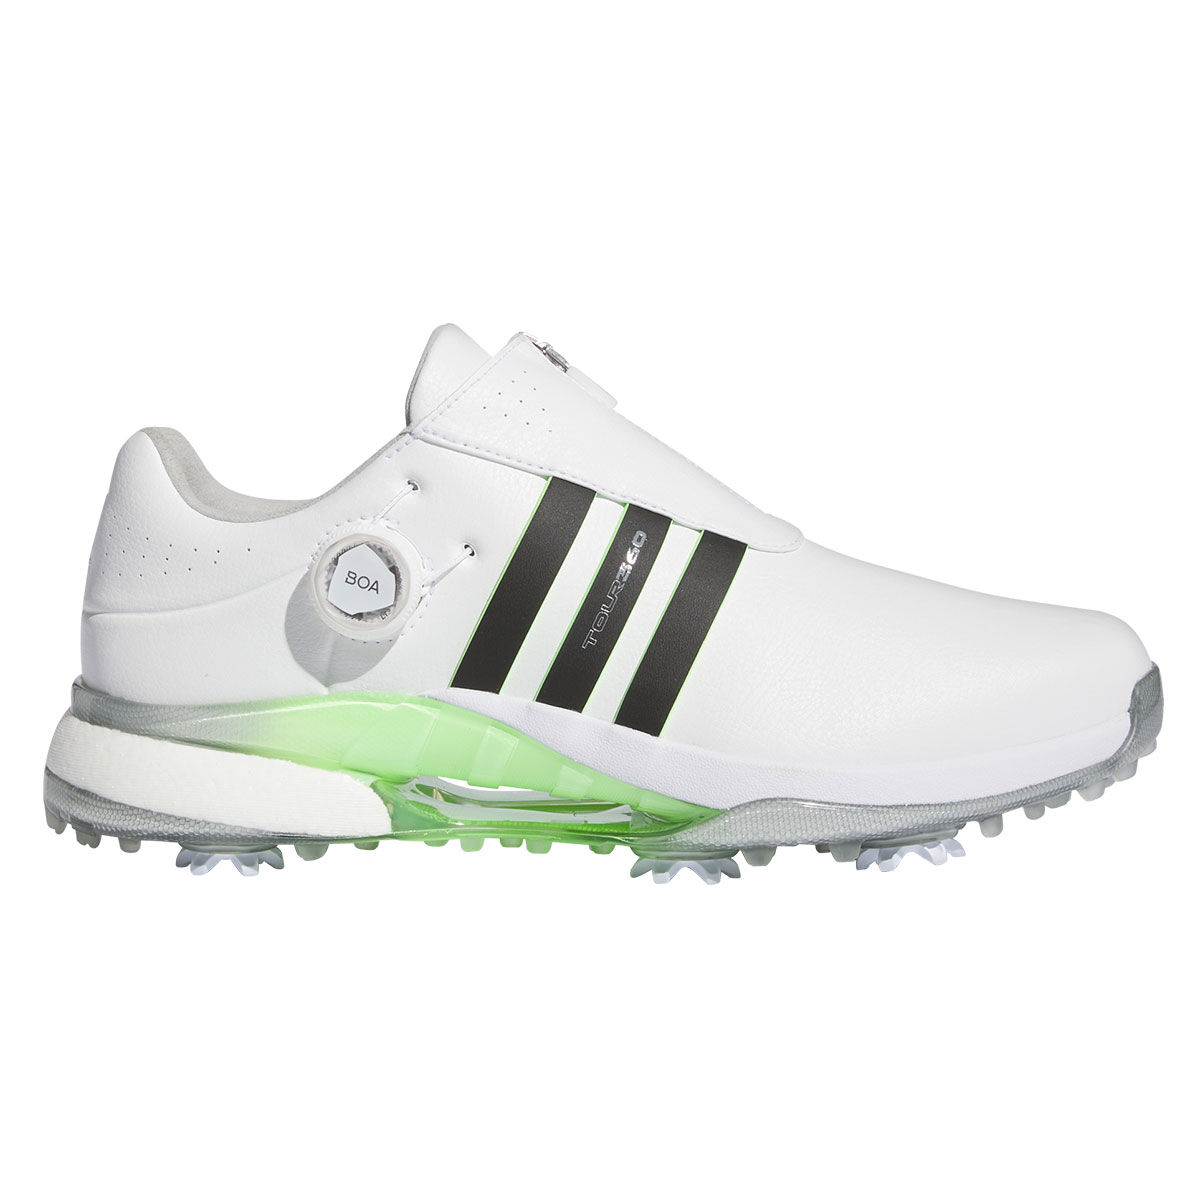 adidas Men’s Tour360 24 BOA Boost Waterproof Spiked Golf Shoes, Mens, White/core black/green spark, 10 | American Golf